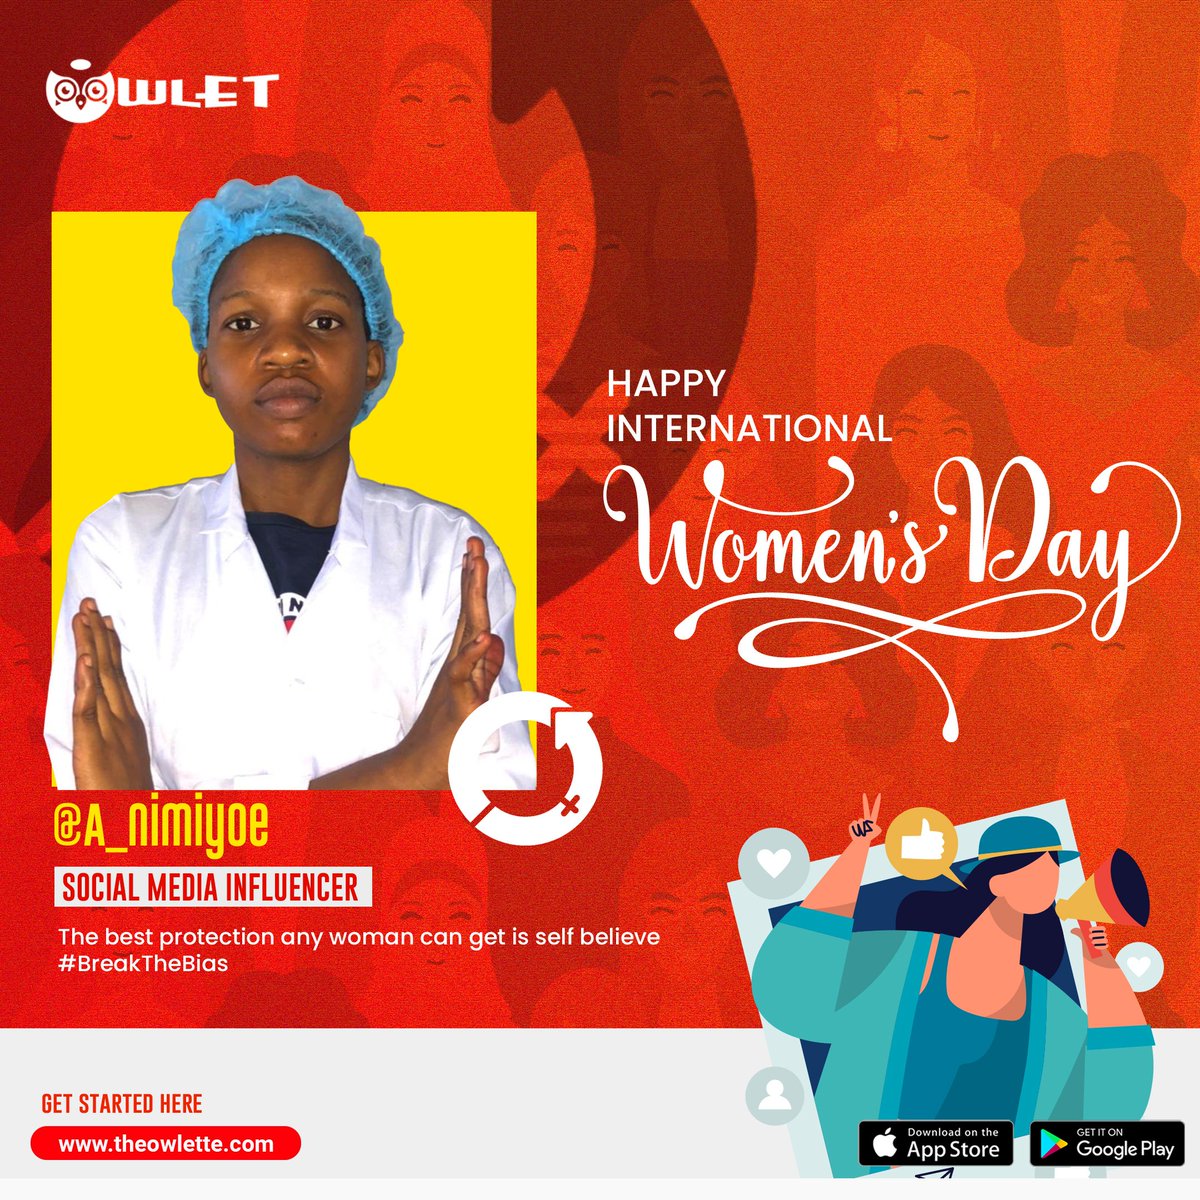 In case you don't know, @theowlette platform isn't just a social media platform, it's more than that. #OwletIWD2022

@A_Nimiyoe is amongst other women who stand with owlet to wish her fellow women happy international women’s day.